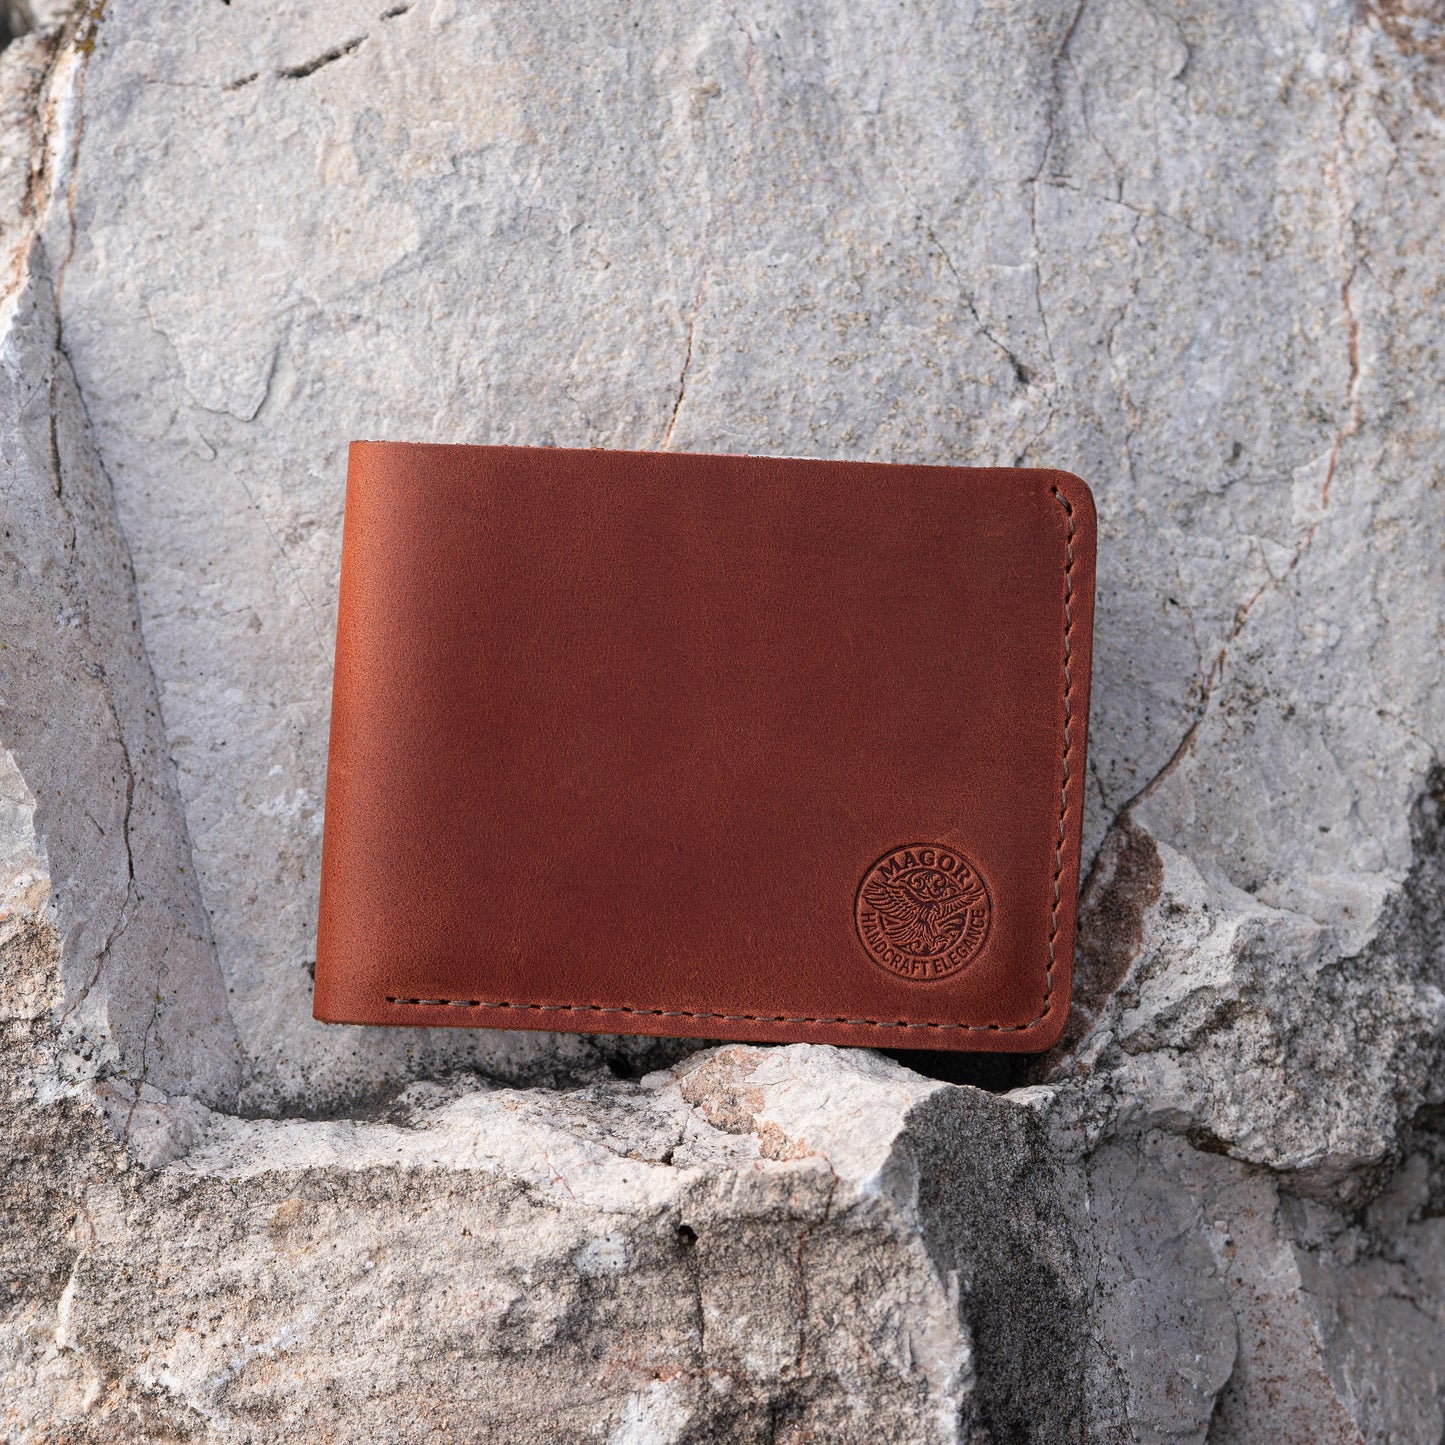 Leather Minimalist Bifold Wallet - Classic Slim Style - Handcrafted